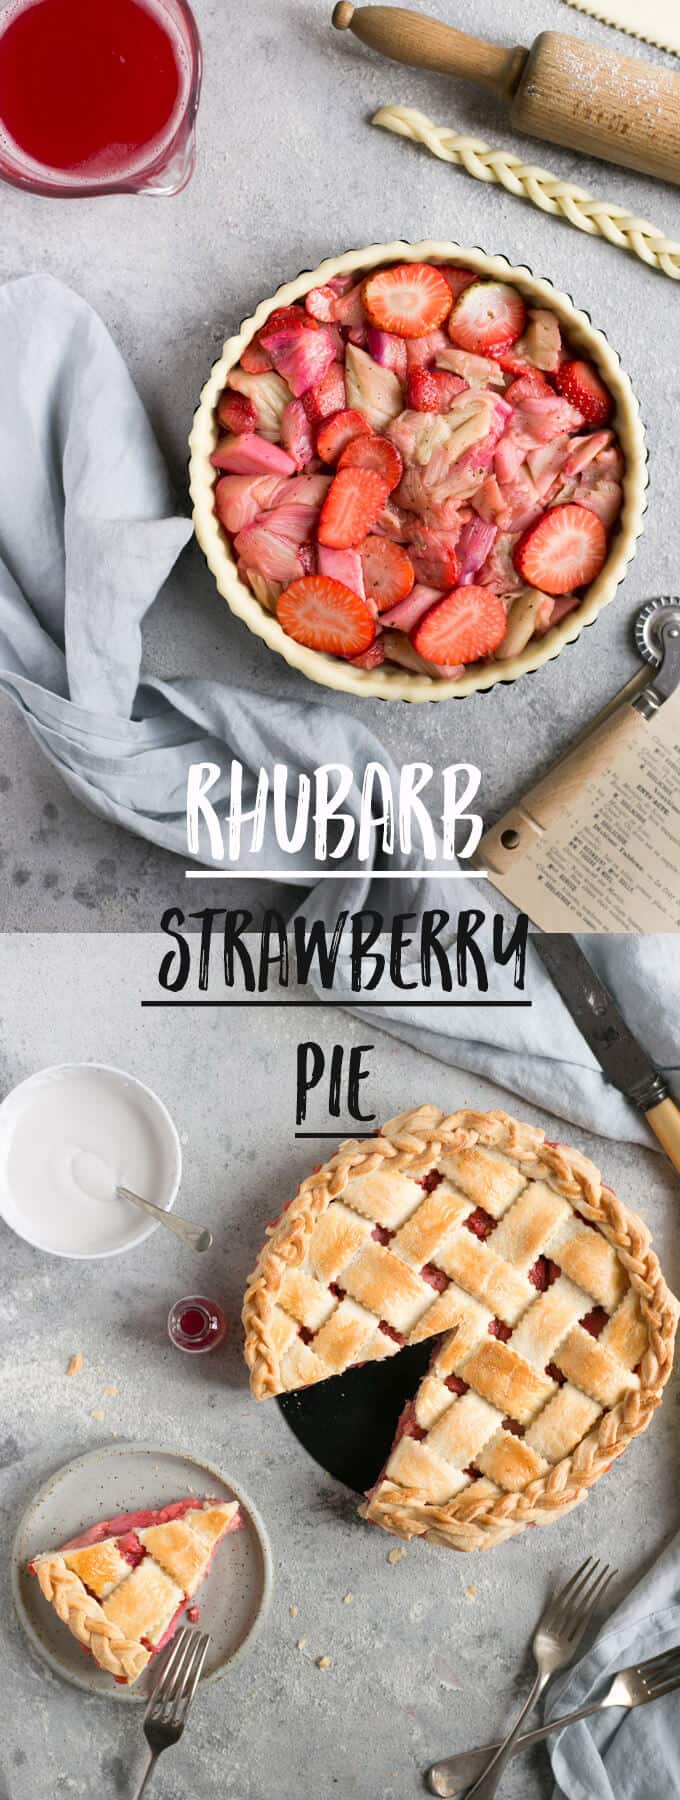 Classic rhubarb strawberry pie recipe! Delicious buttery pastry filled with tangy-sweet rhubarb and strawberries! #rhubarb #pie #vegan #strawberry | via @annabanana.co